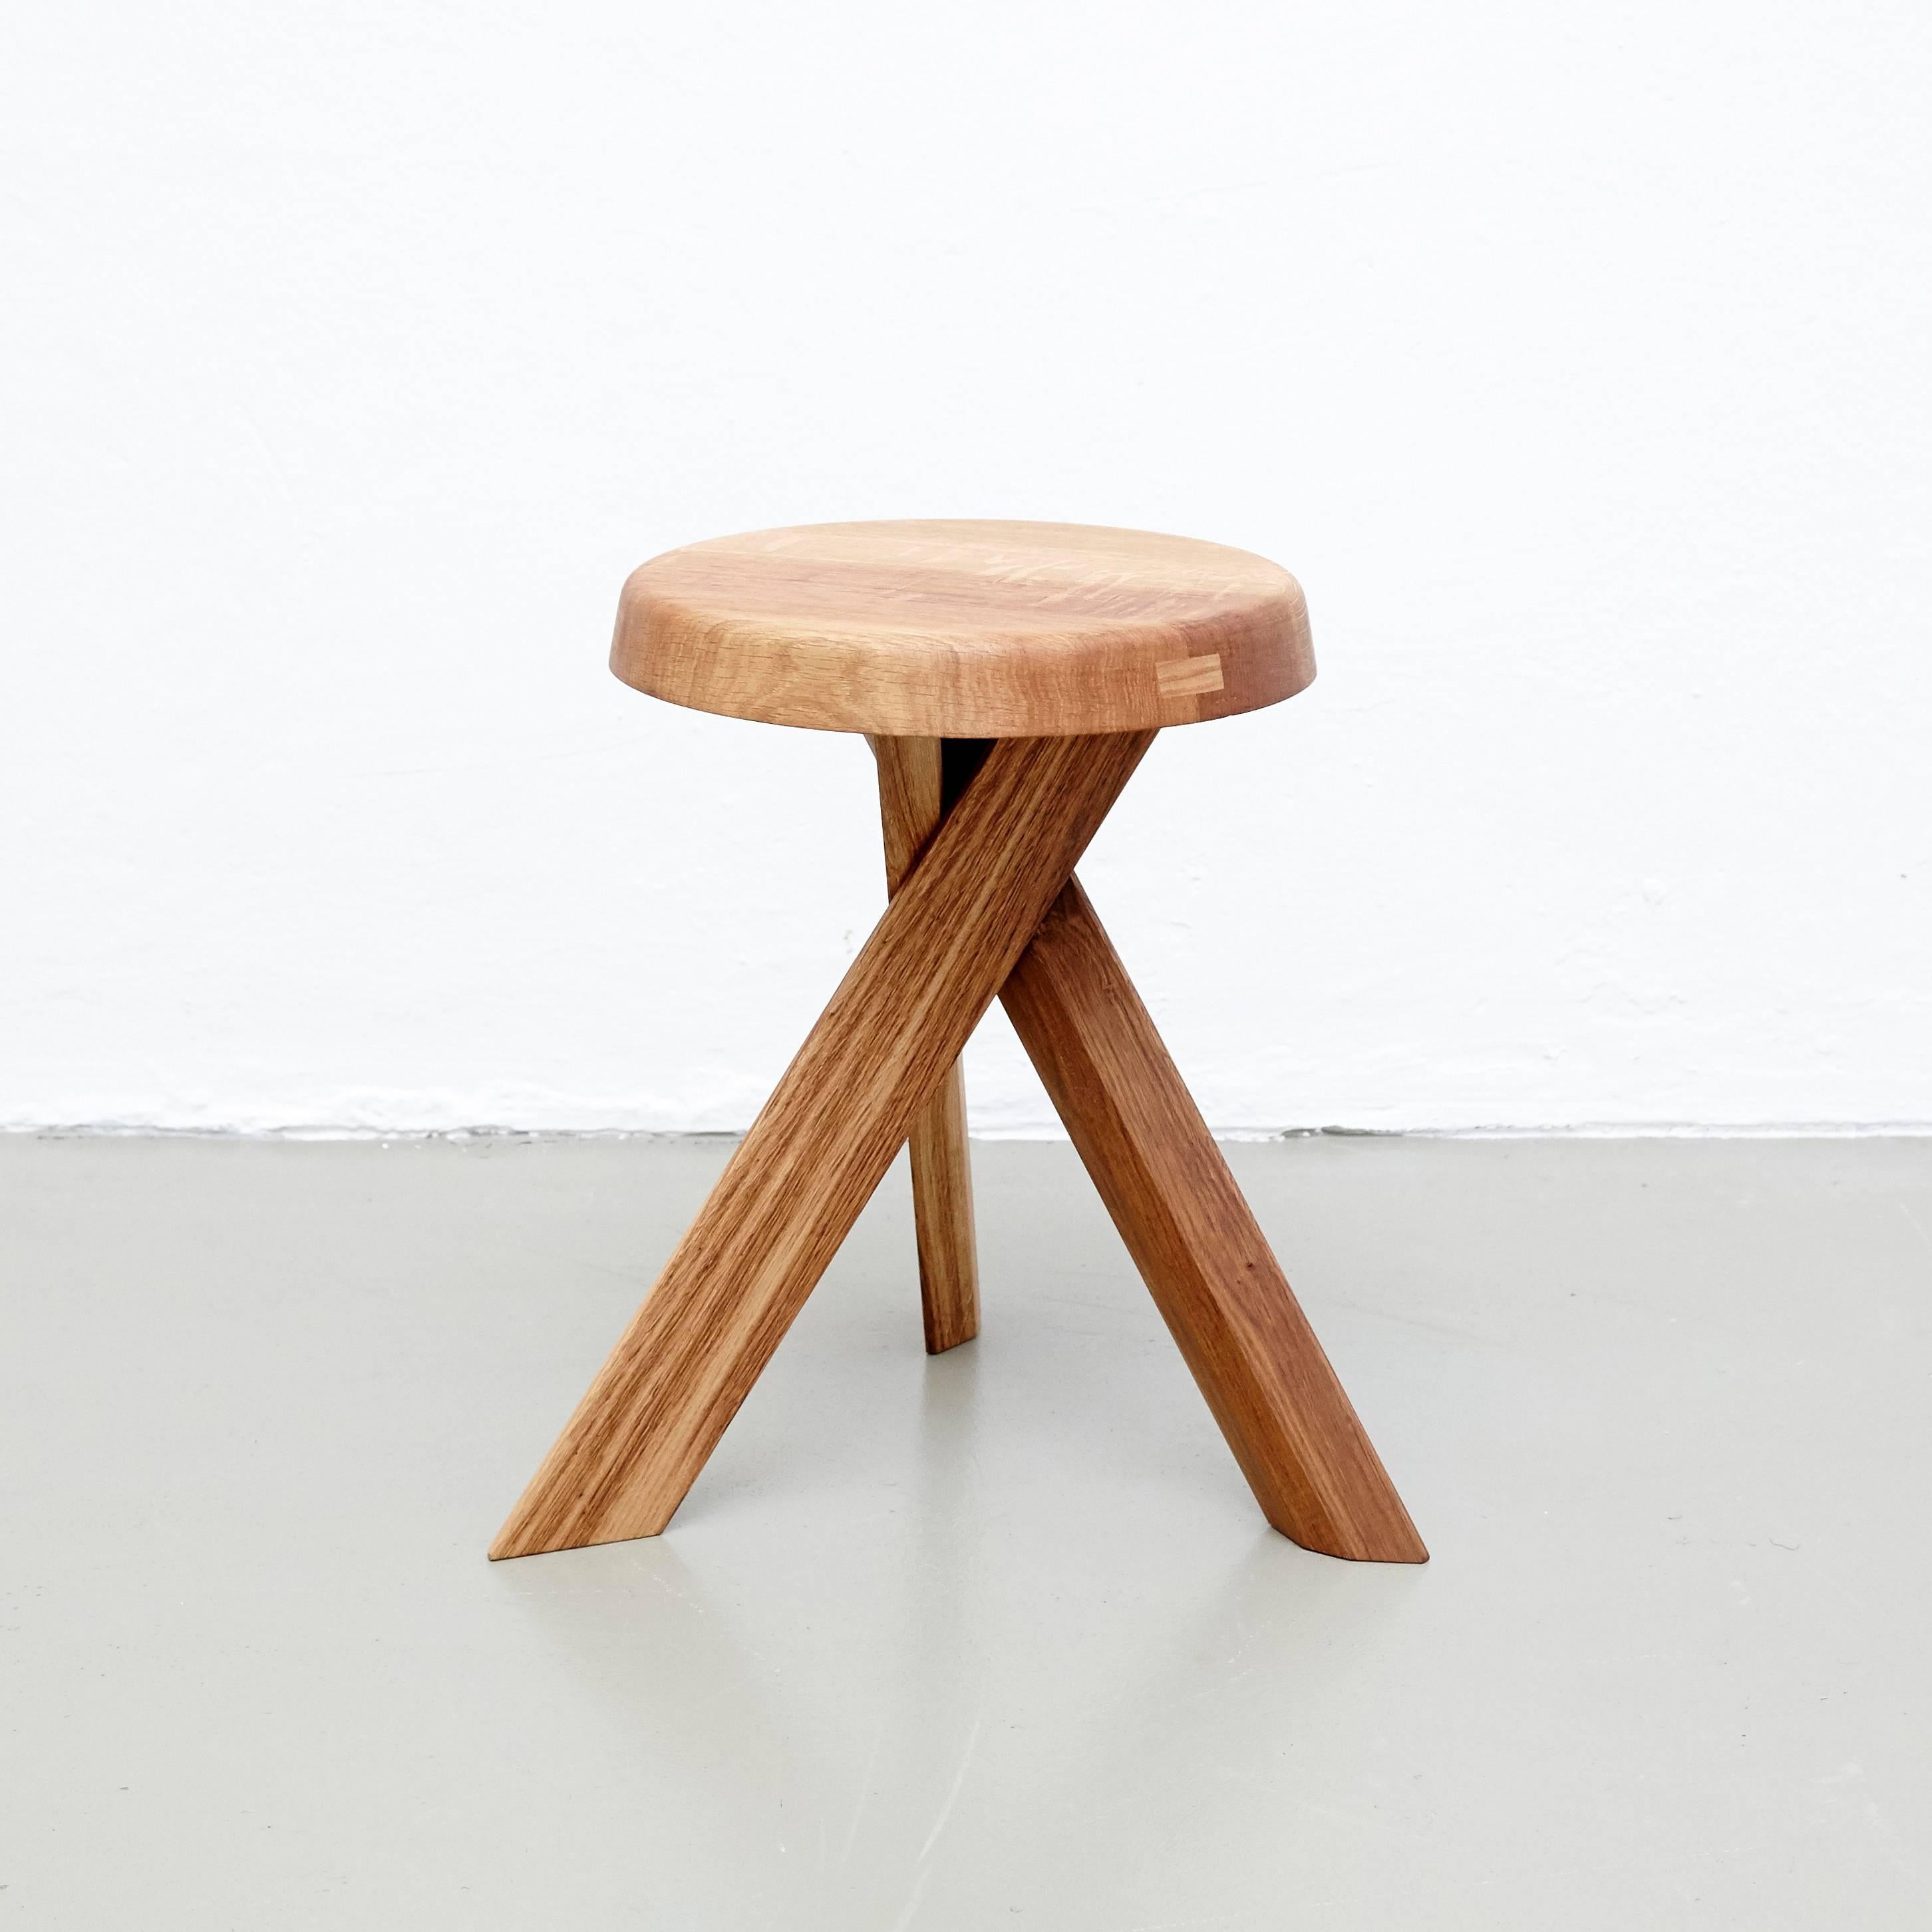 S 31 a stools designed by Pierre Chapo, circa 1960.
Manufactured by Chapo Creation in France, 2015.
Solid oakwood.

In good original condition, with minor wear consistent with age and use, preserving a beautiful patina.

Pierre Chapo is born